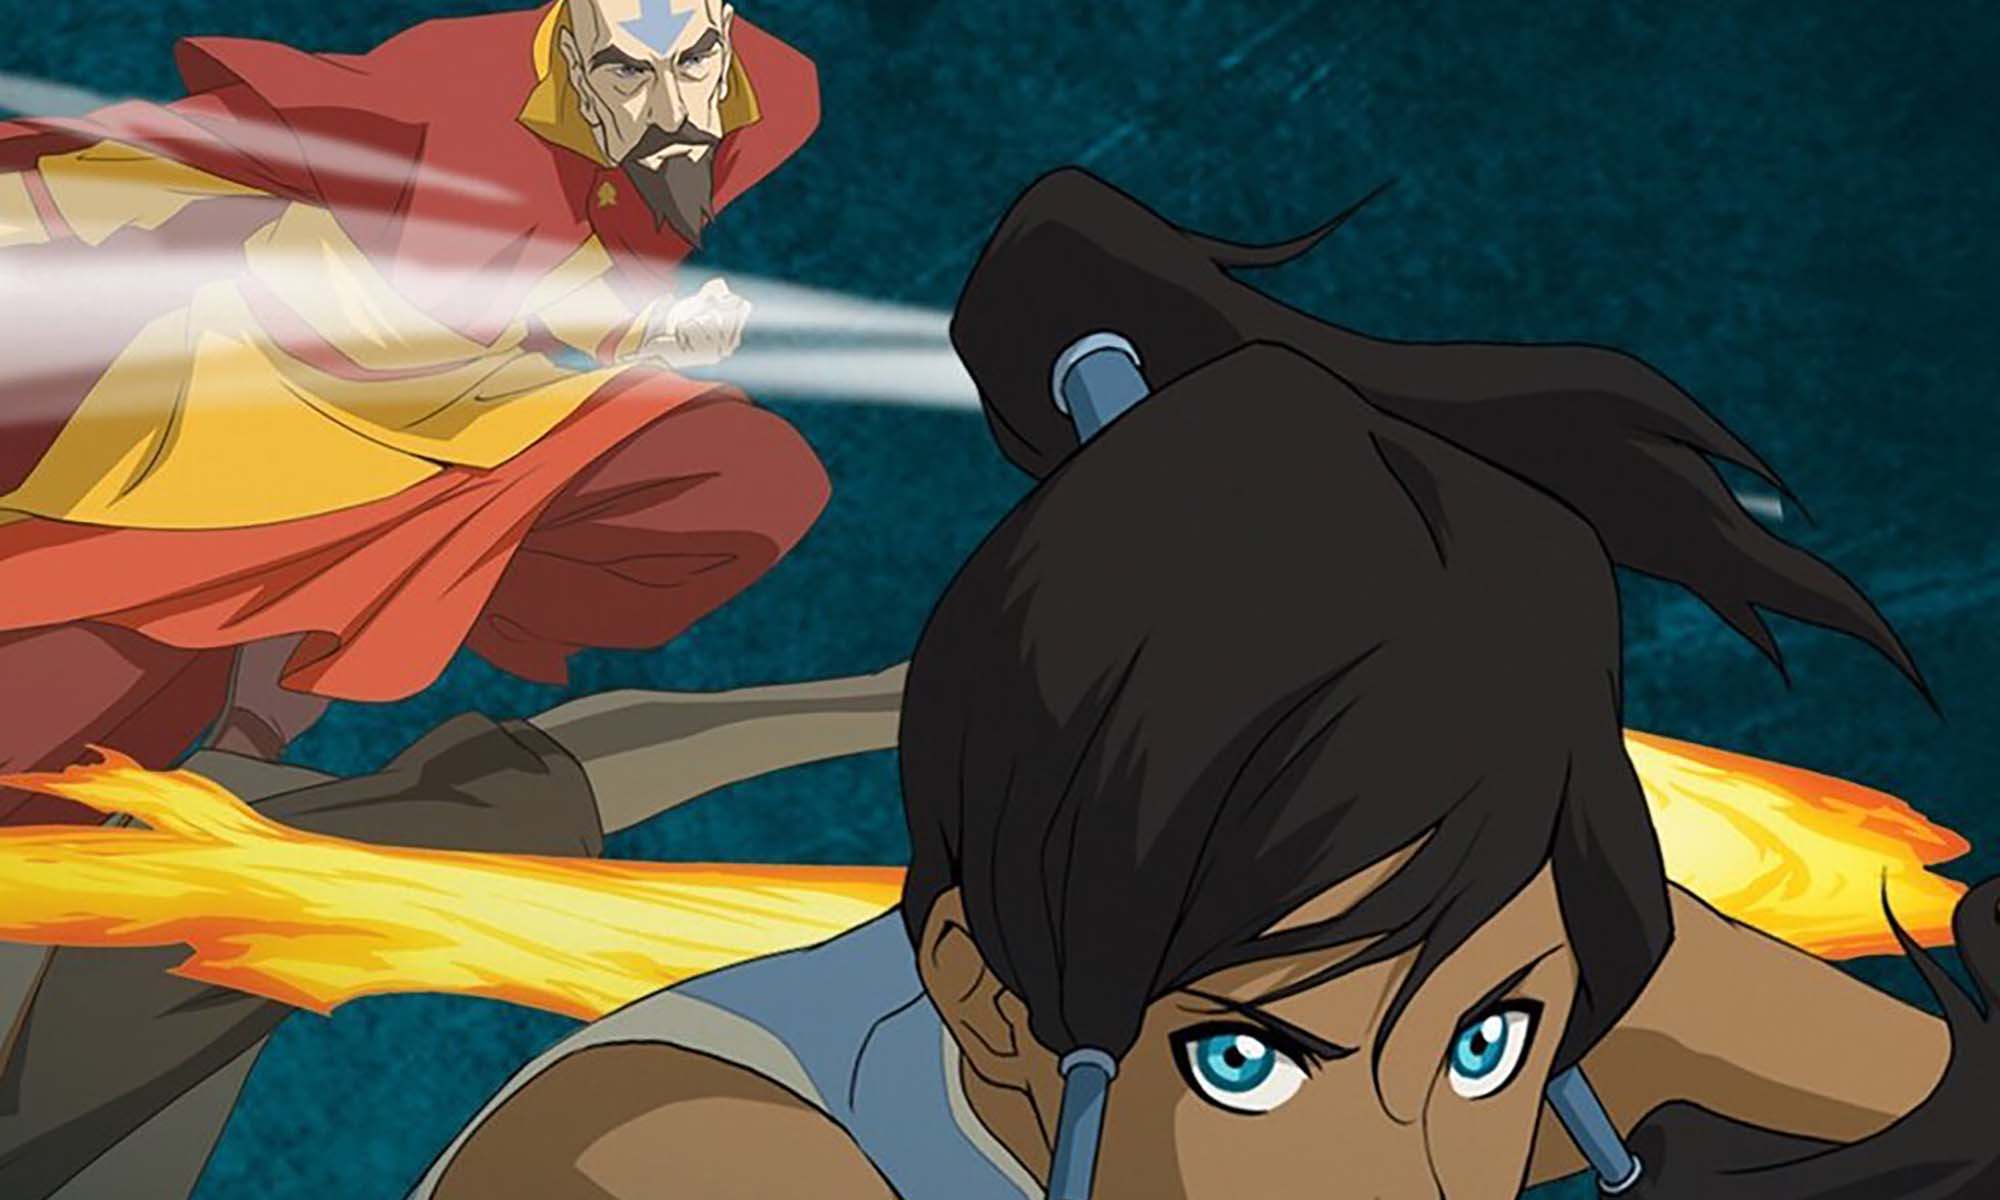 Avatar The Last Airbender  Legend of Korra  Ultimate Aang  Korra  Bluray Collection review  GAMING TREND